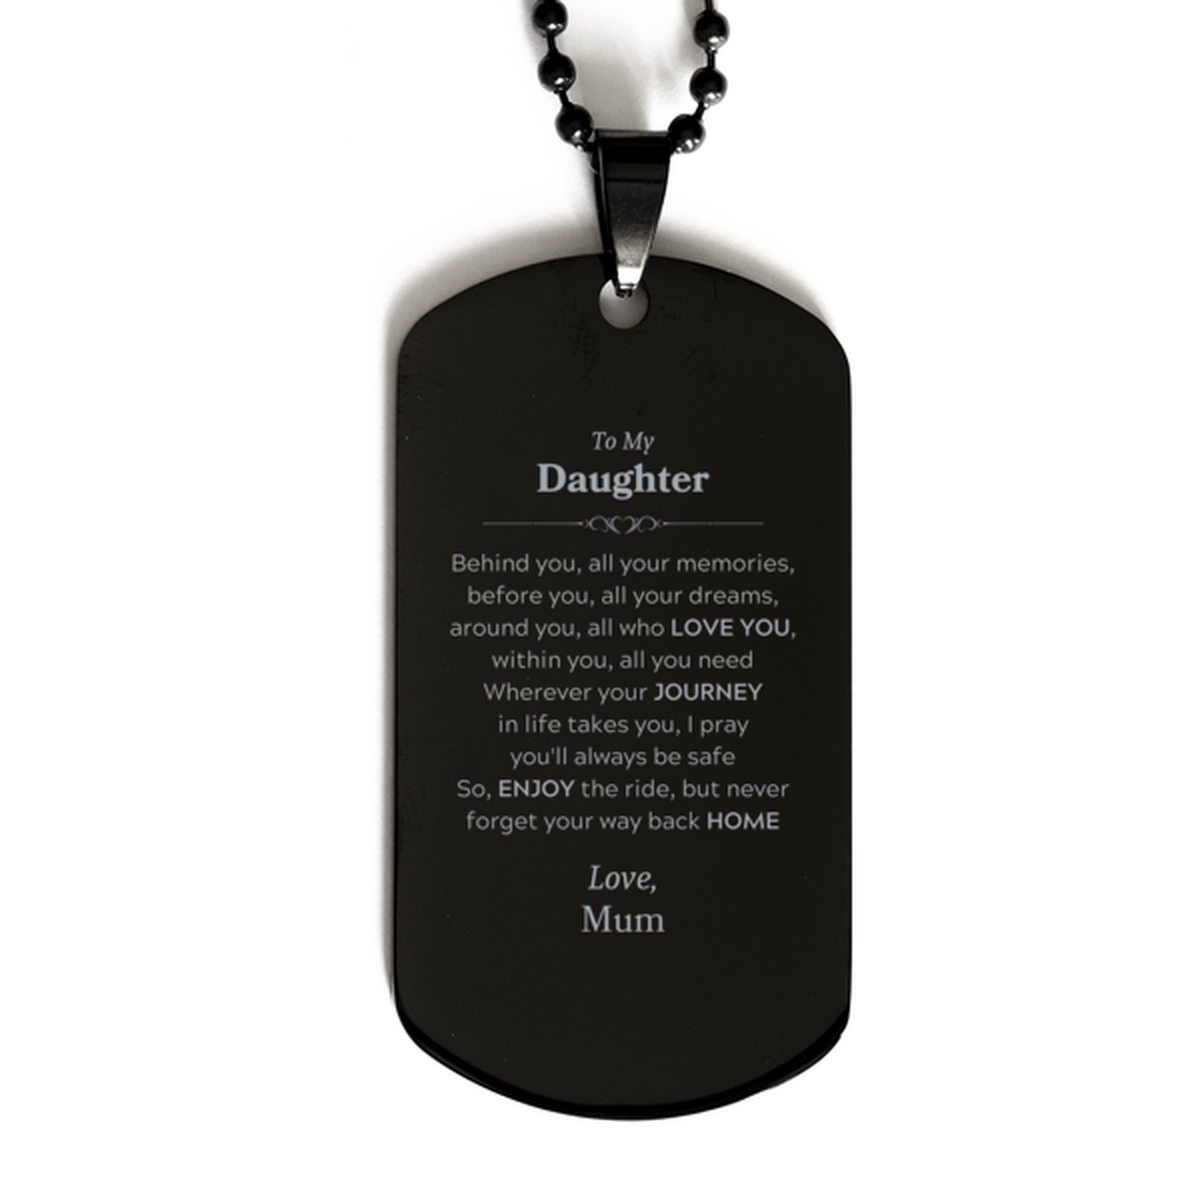 To My Daughter Graduation Gifts from Mum, Daughter Black Dog Tag Christmas Birthday Gifts for Daughter Behind you, all your memories, before you, all your dreams. Love, Mum